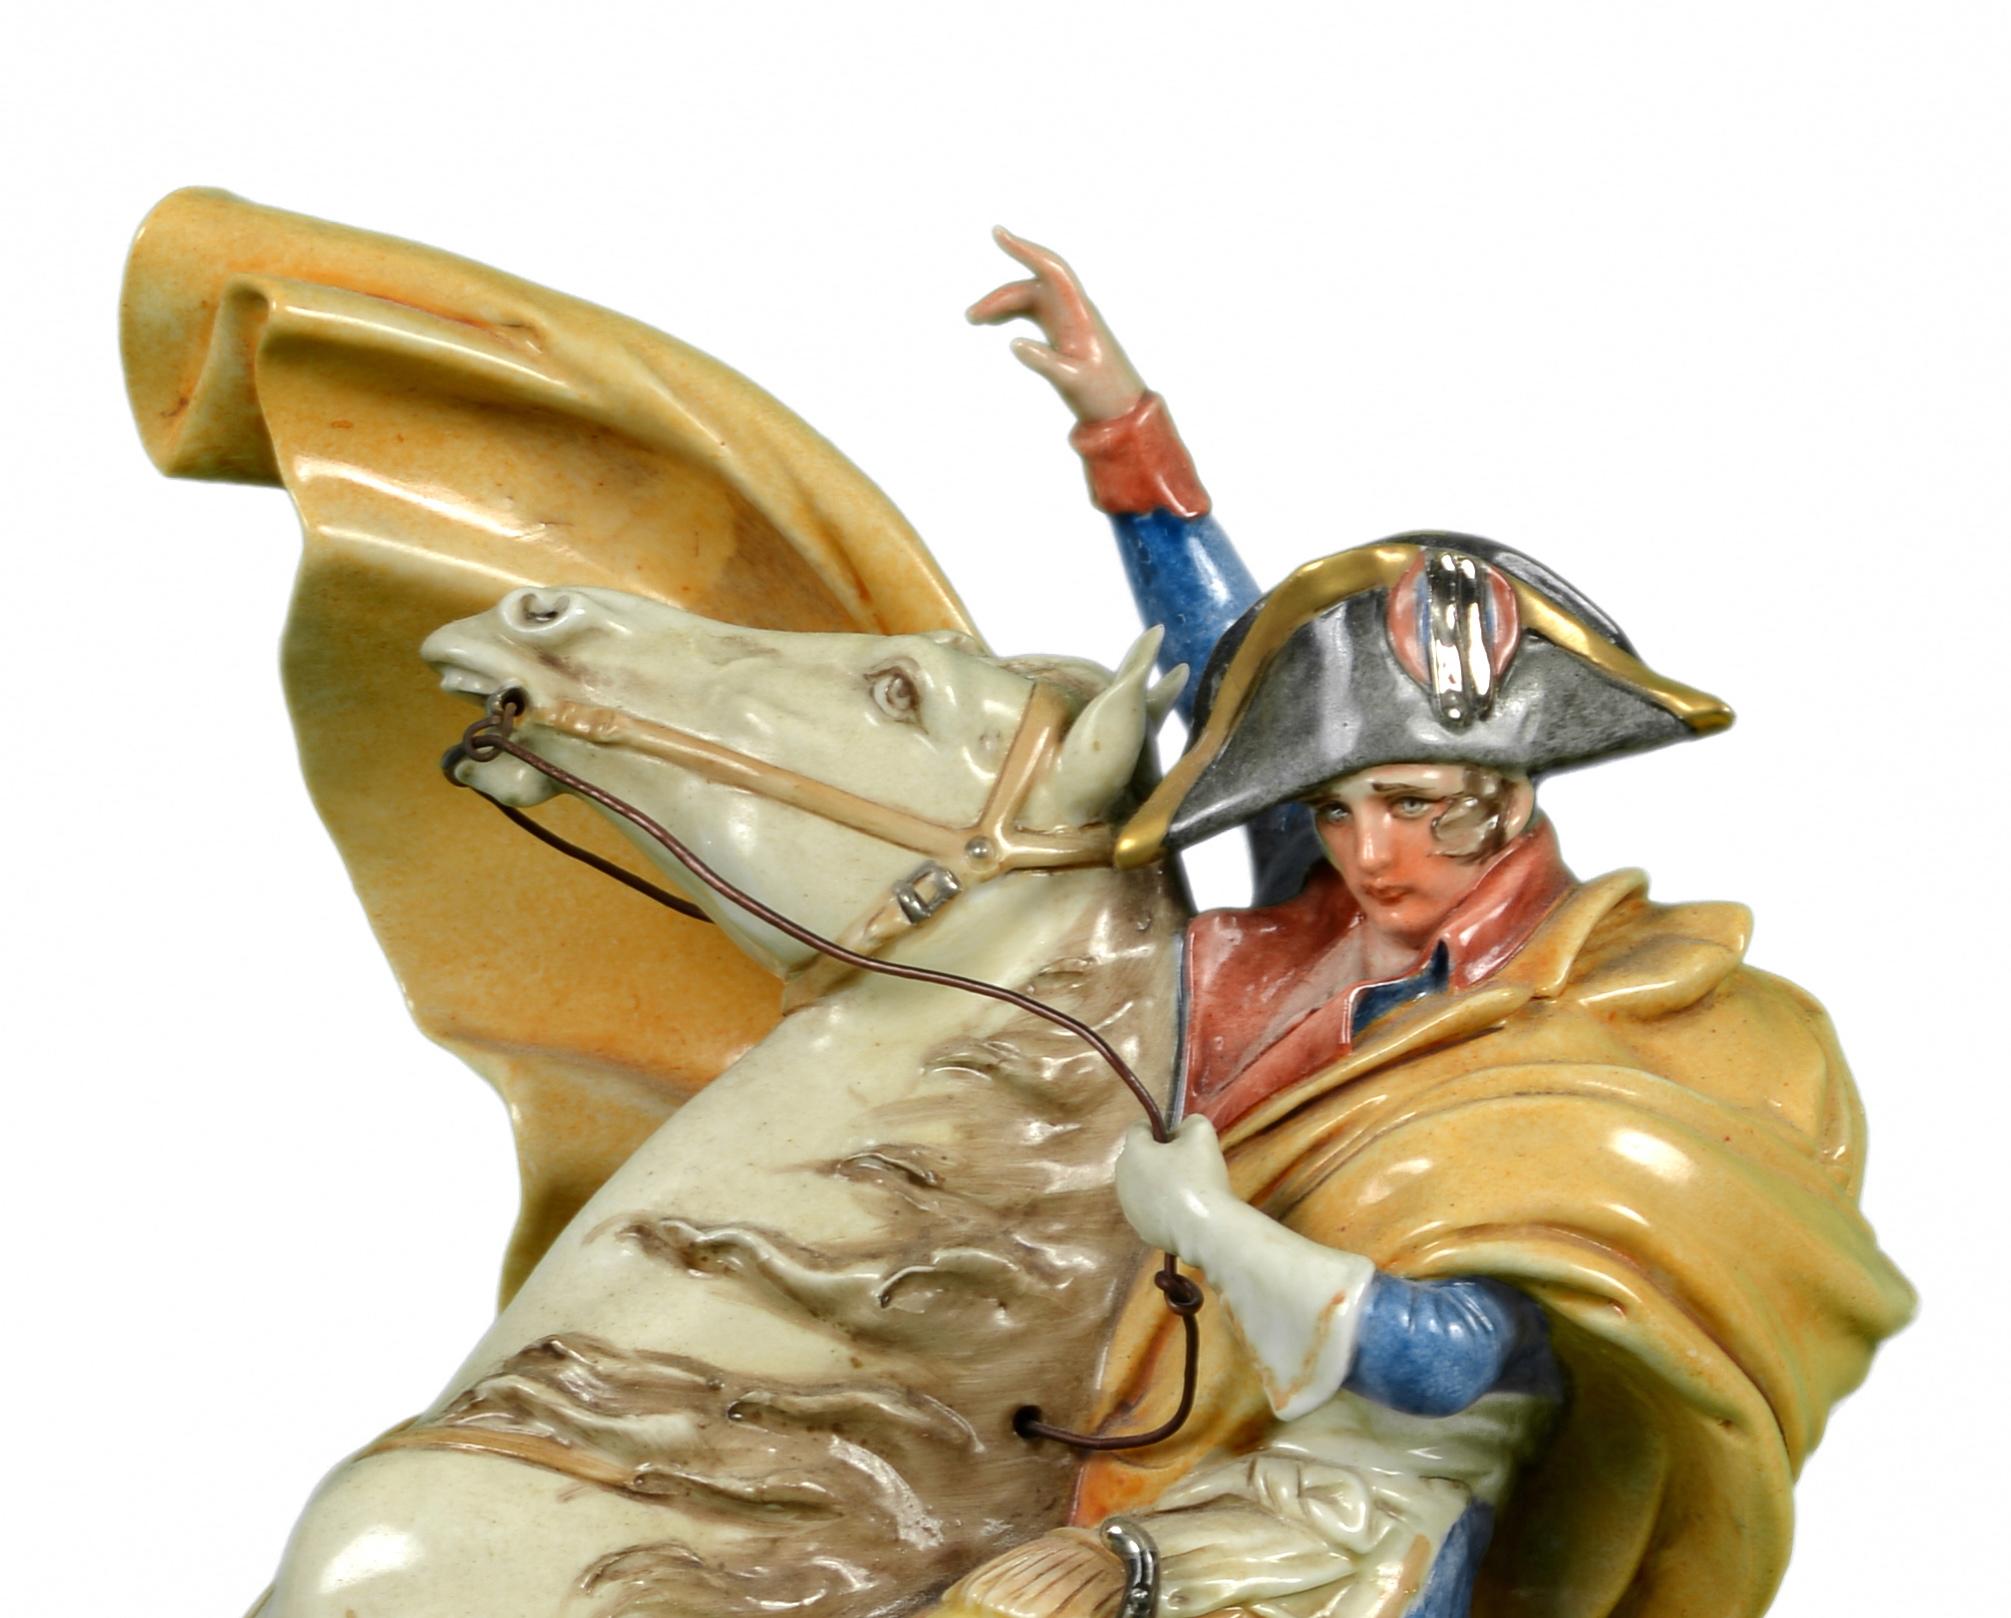 Capodimonte Porcelain Figure
Napoleon on Horse
By the master sculptor Bruno Merli
Signed 'Merli' next to blue Crown over N marks in tiny medallion
Base with N between two eagles
31.5 cm tall
Width base : 20 cm
The subject is taken after an